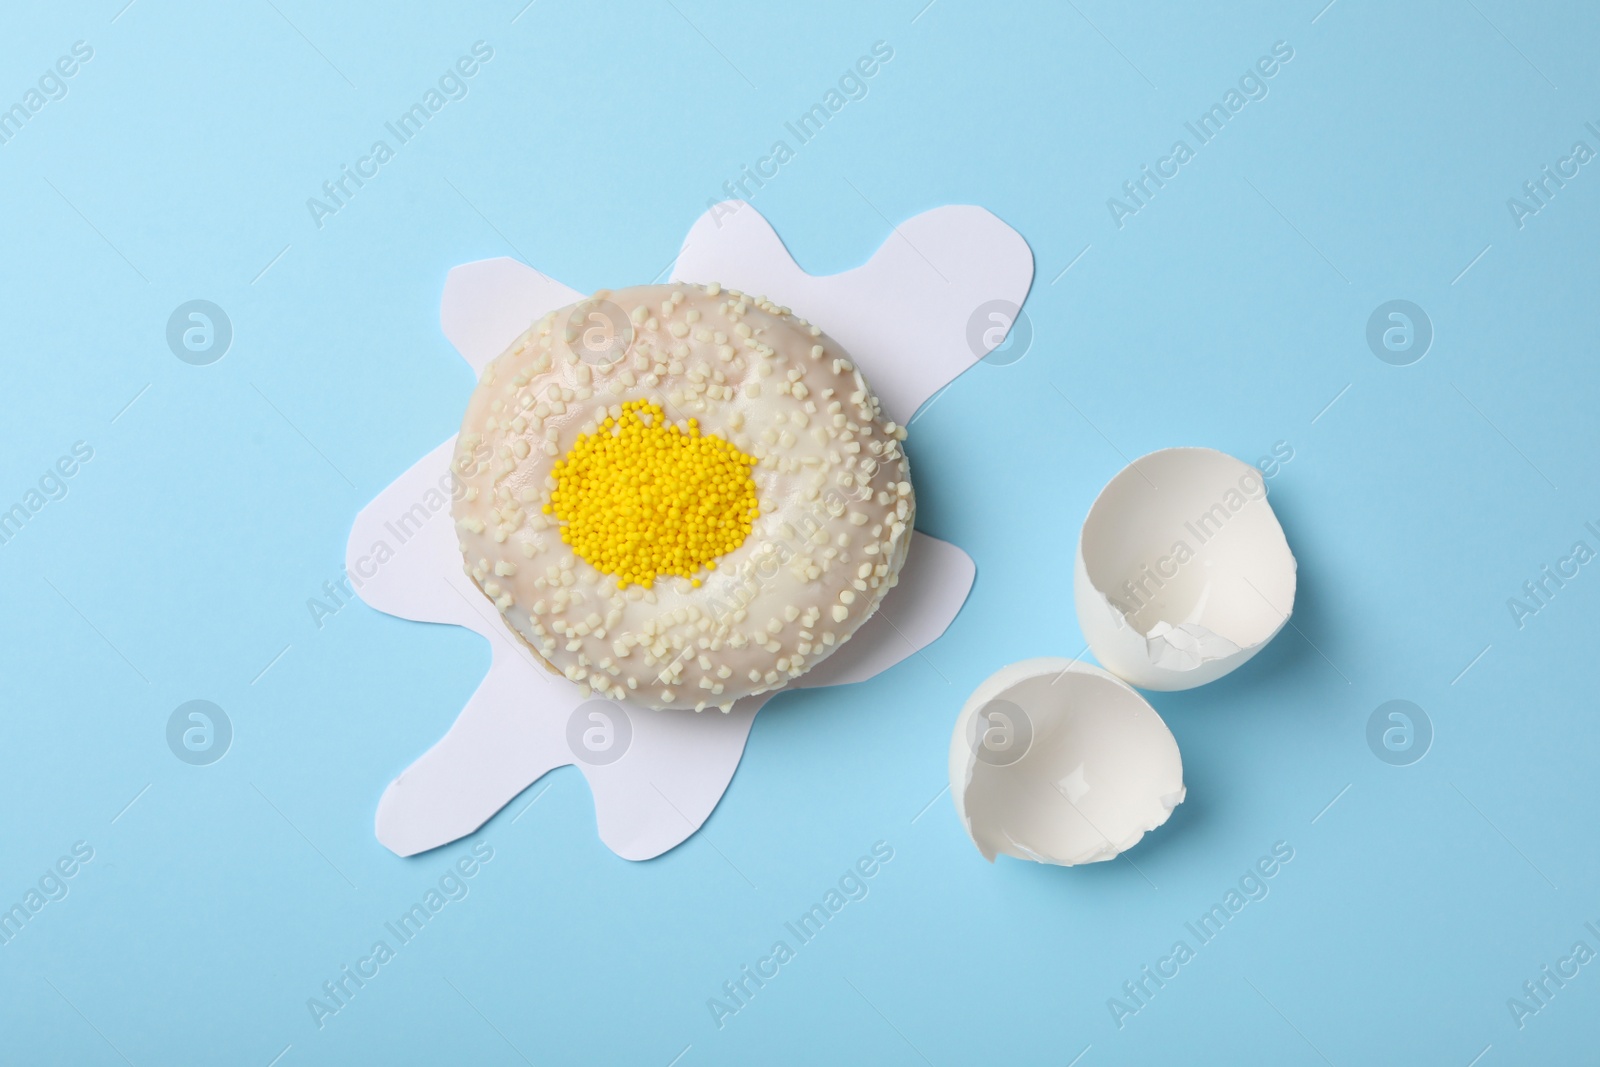 Photo of Broken egg made with donut and paper on light blue background, flat lay